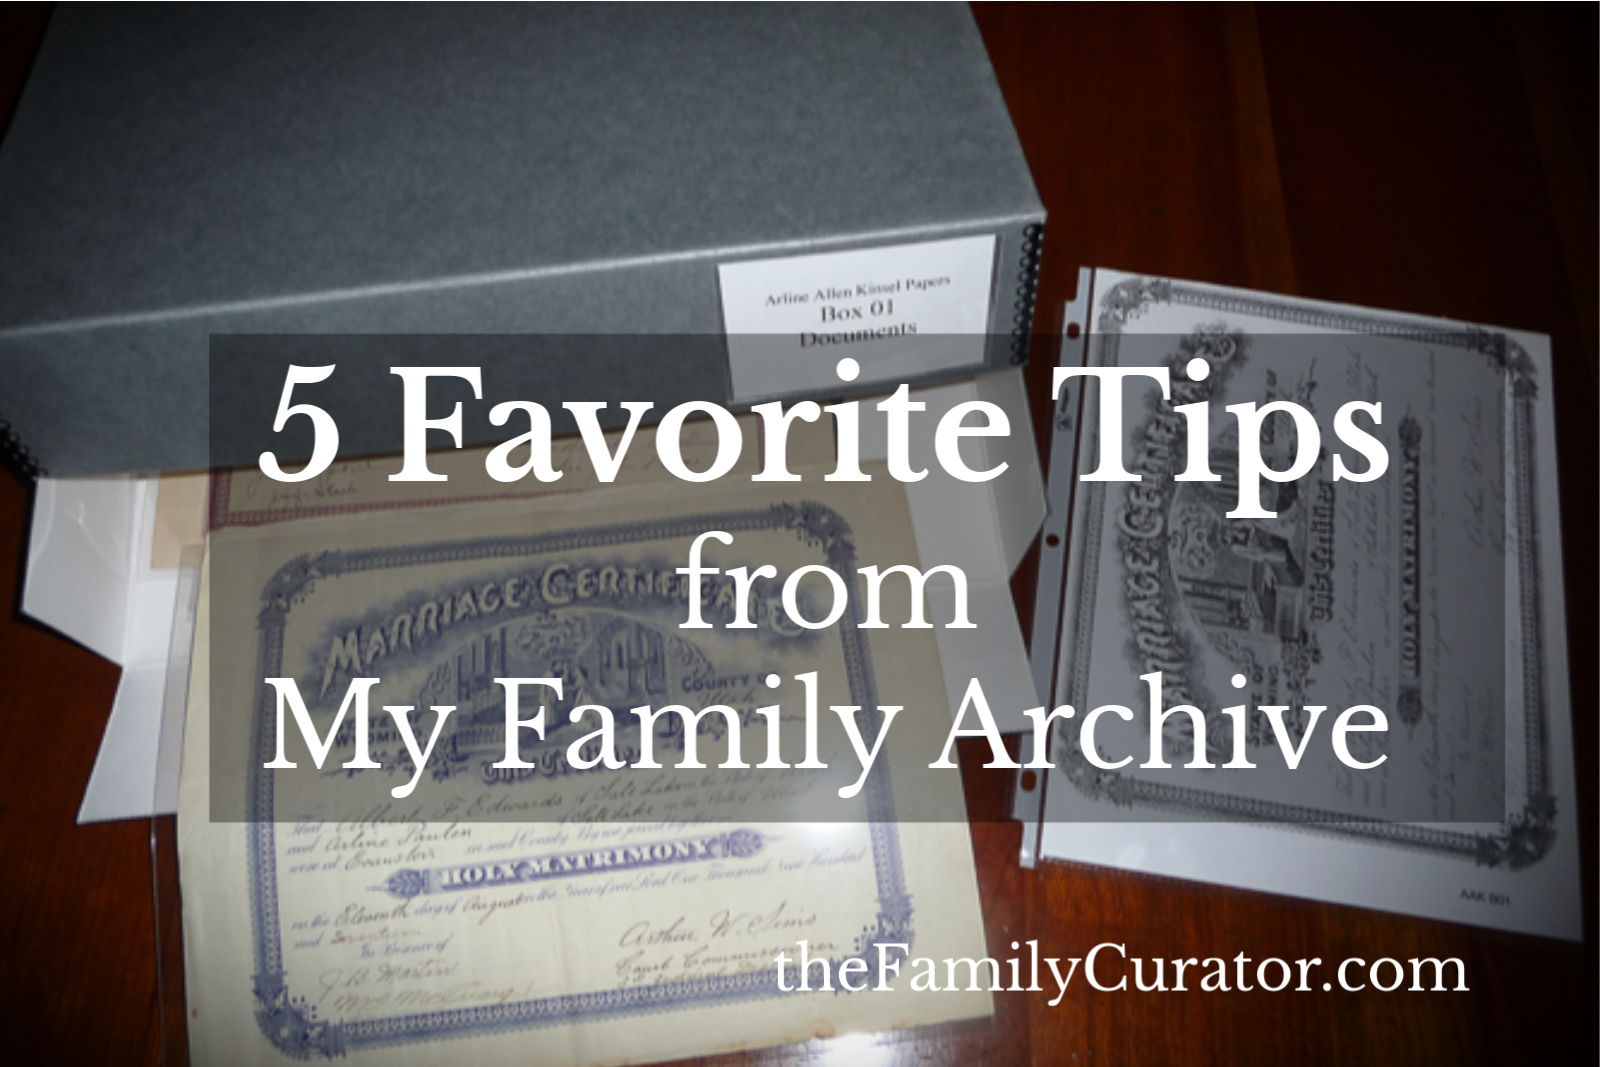 5 Favorite Tips from My Family Archive